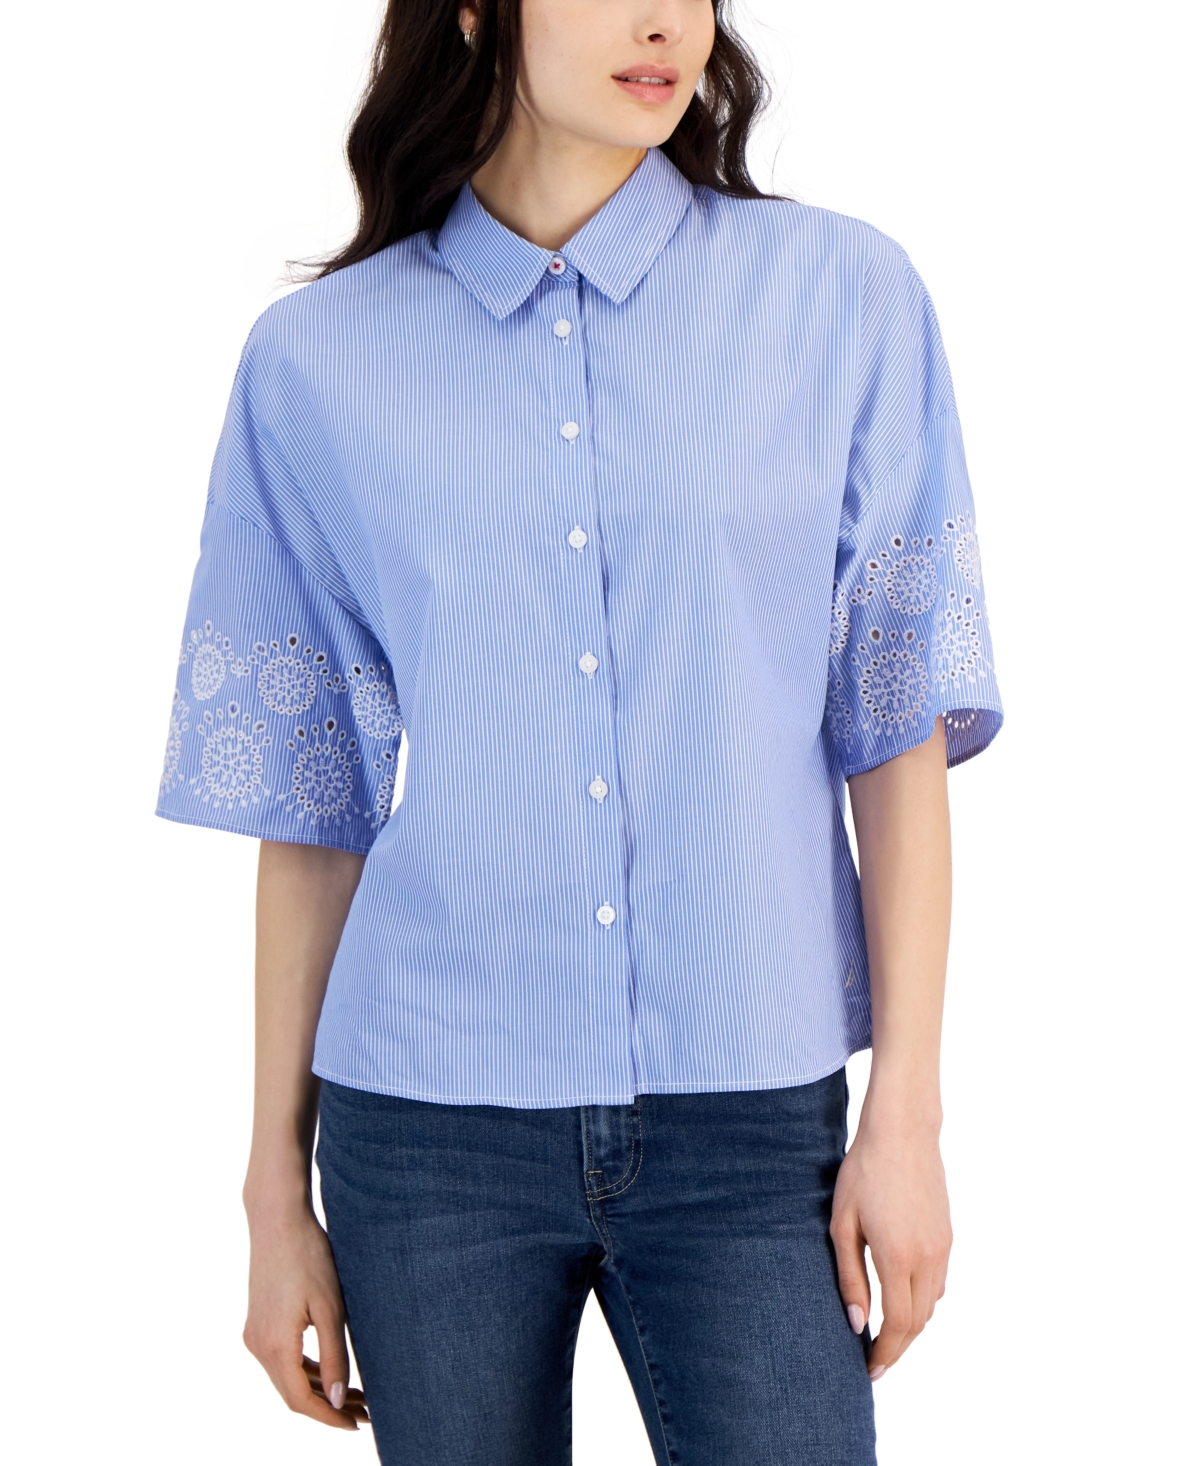 Women's Cotton Embroidered-Sleeve Boxy Shirt - Blue/ White